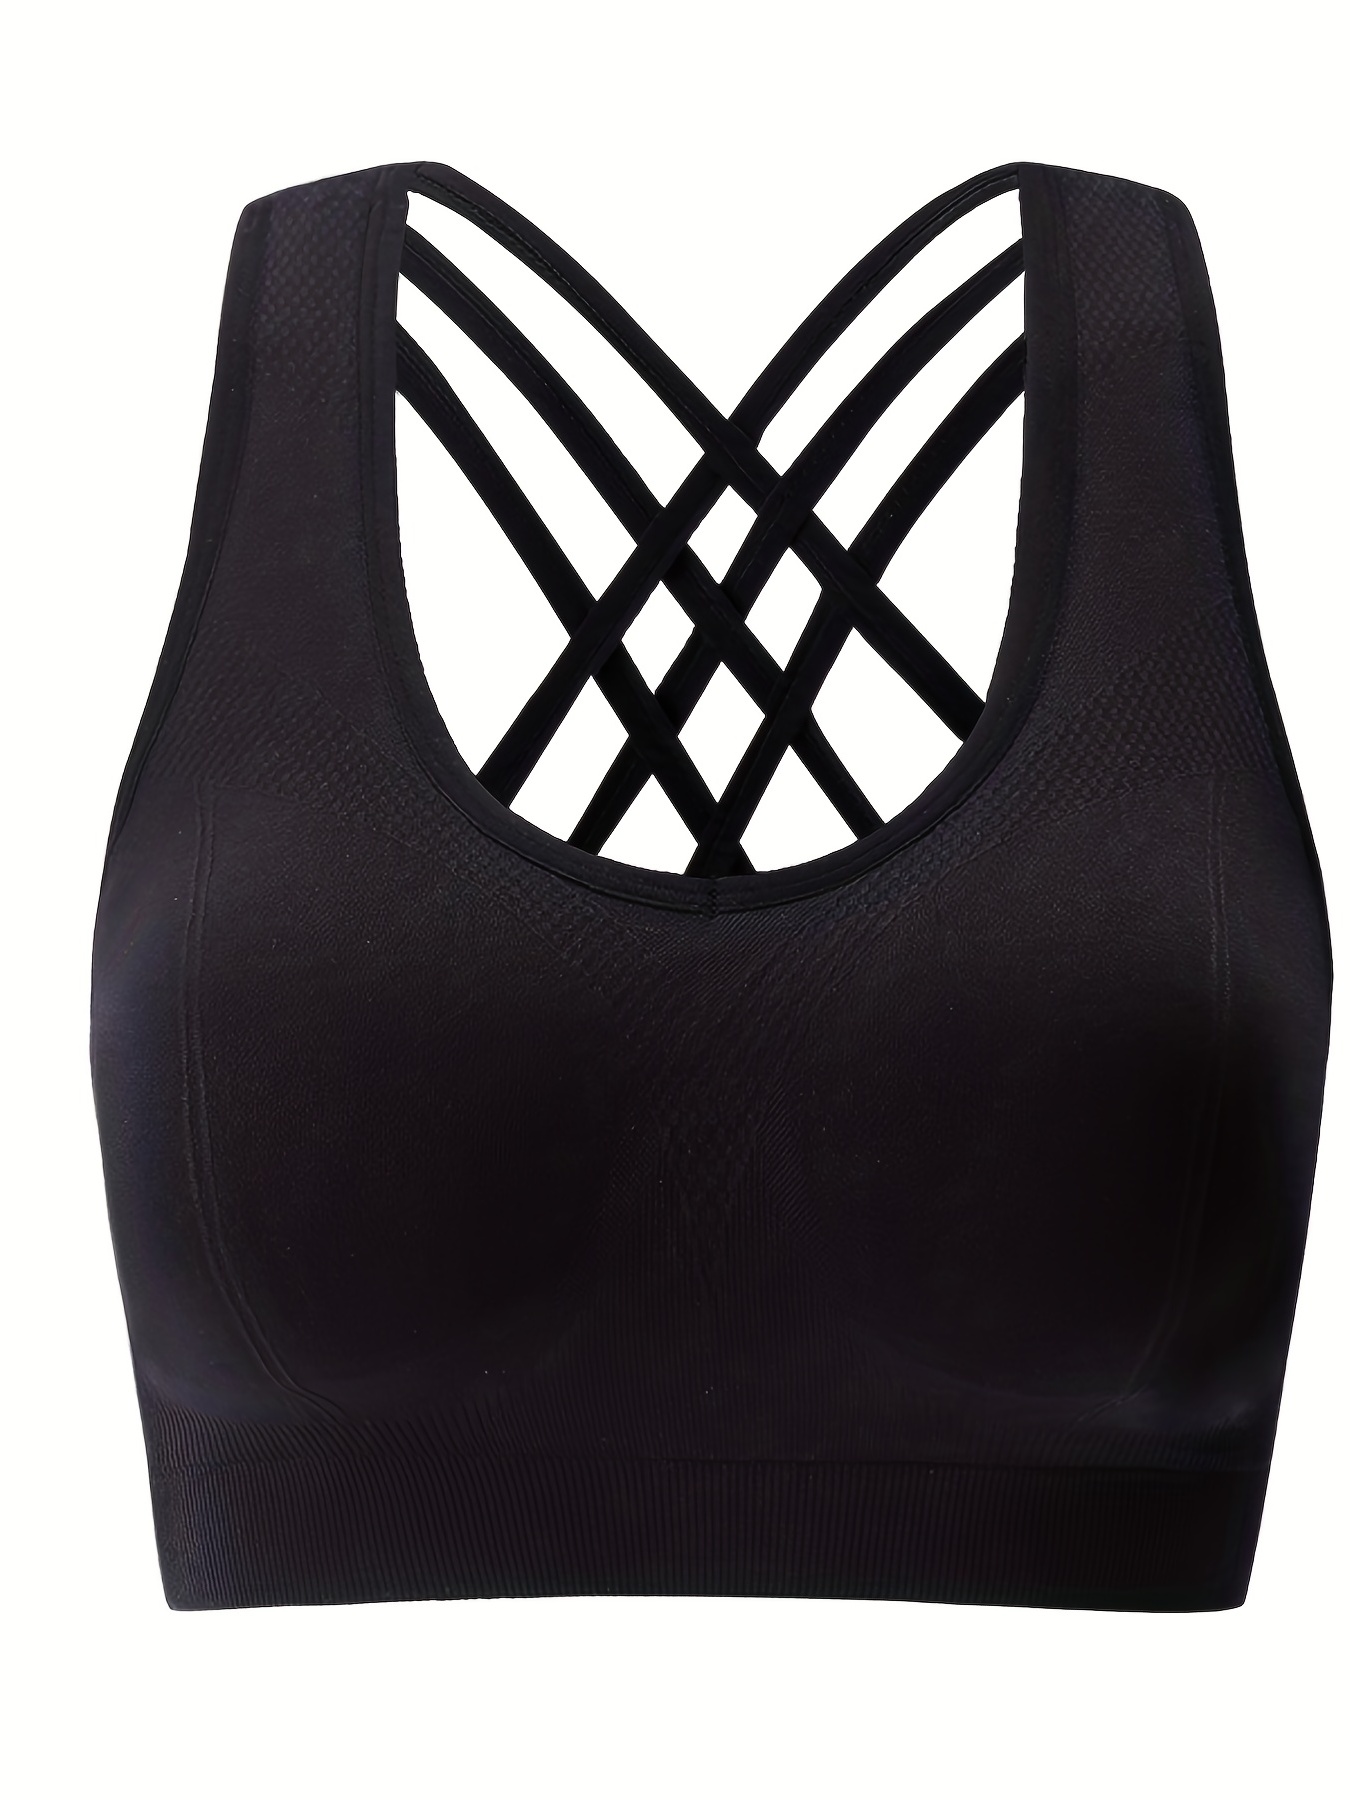 Women's Activewear: Solid Wide Straps High Impact Sports Bra